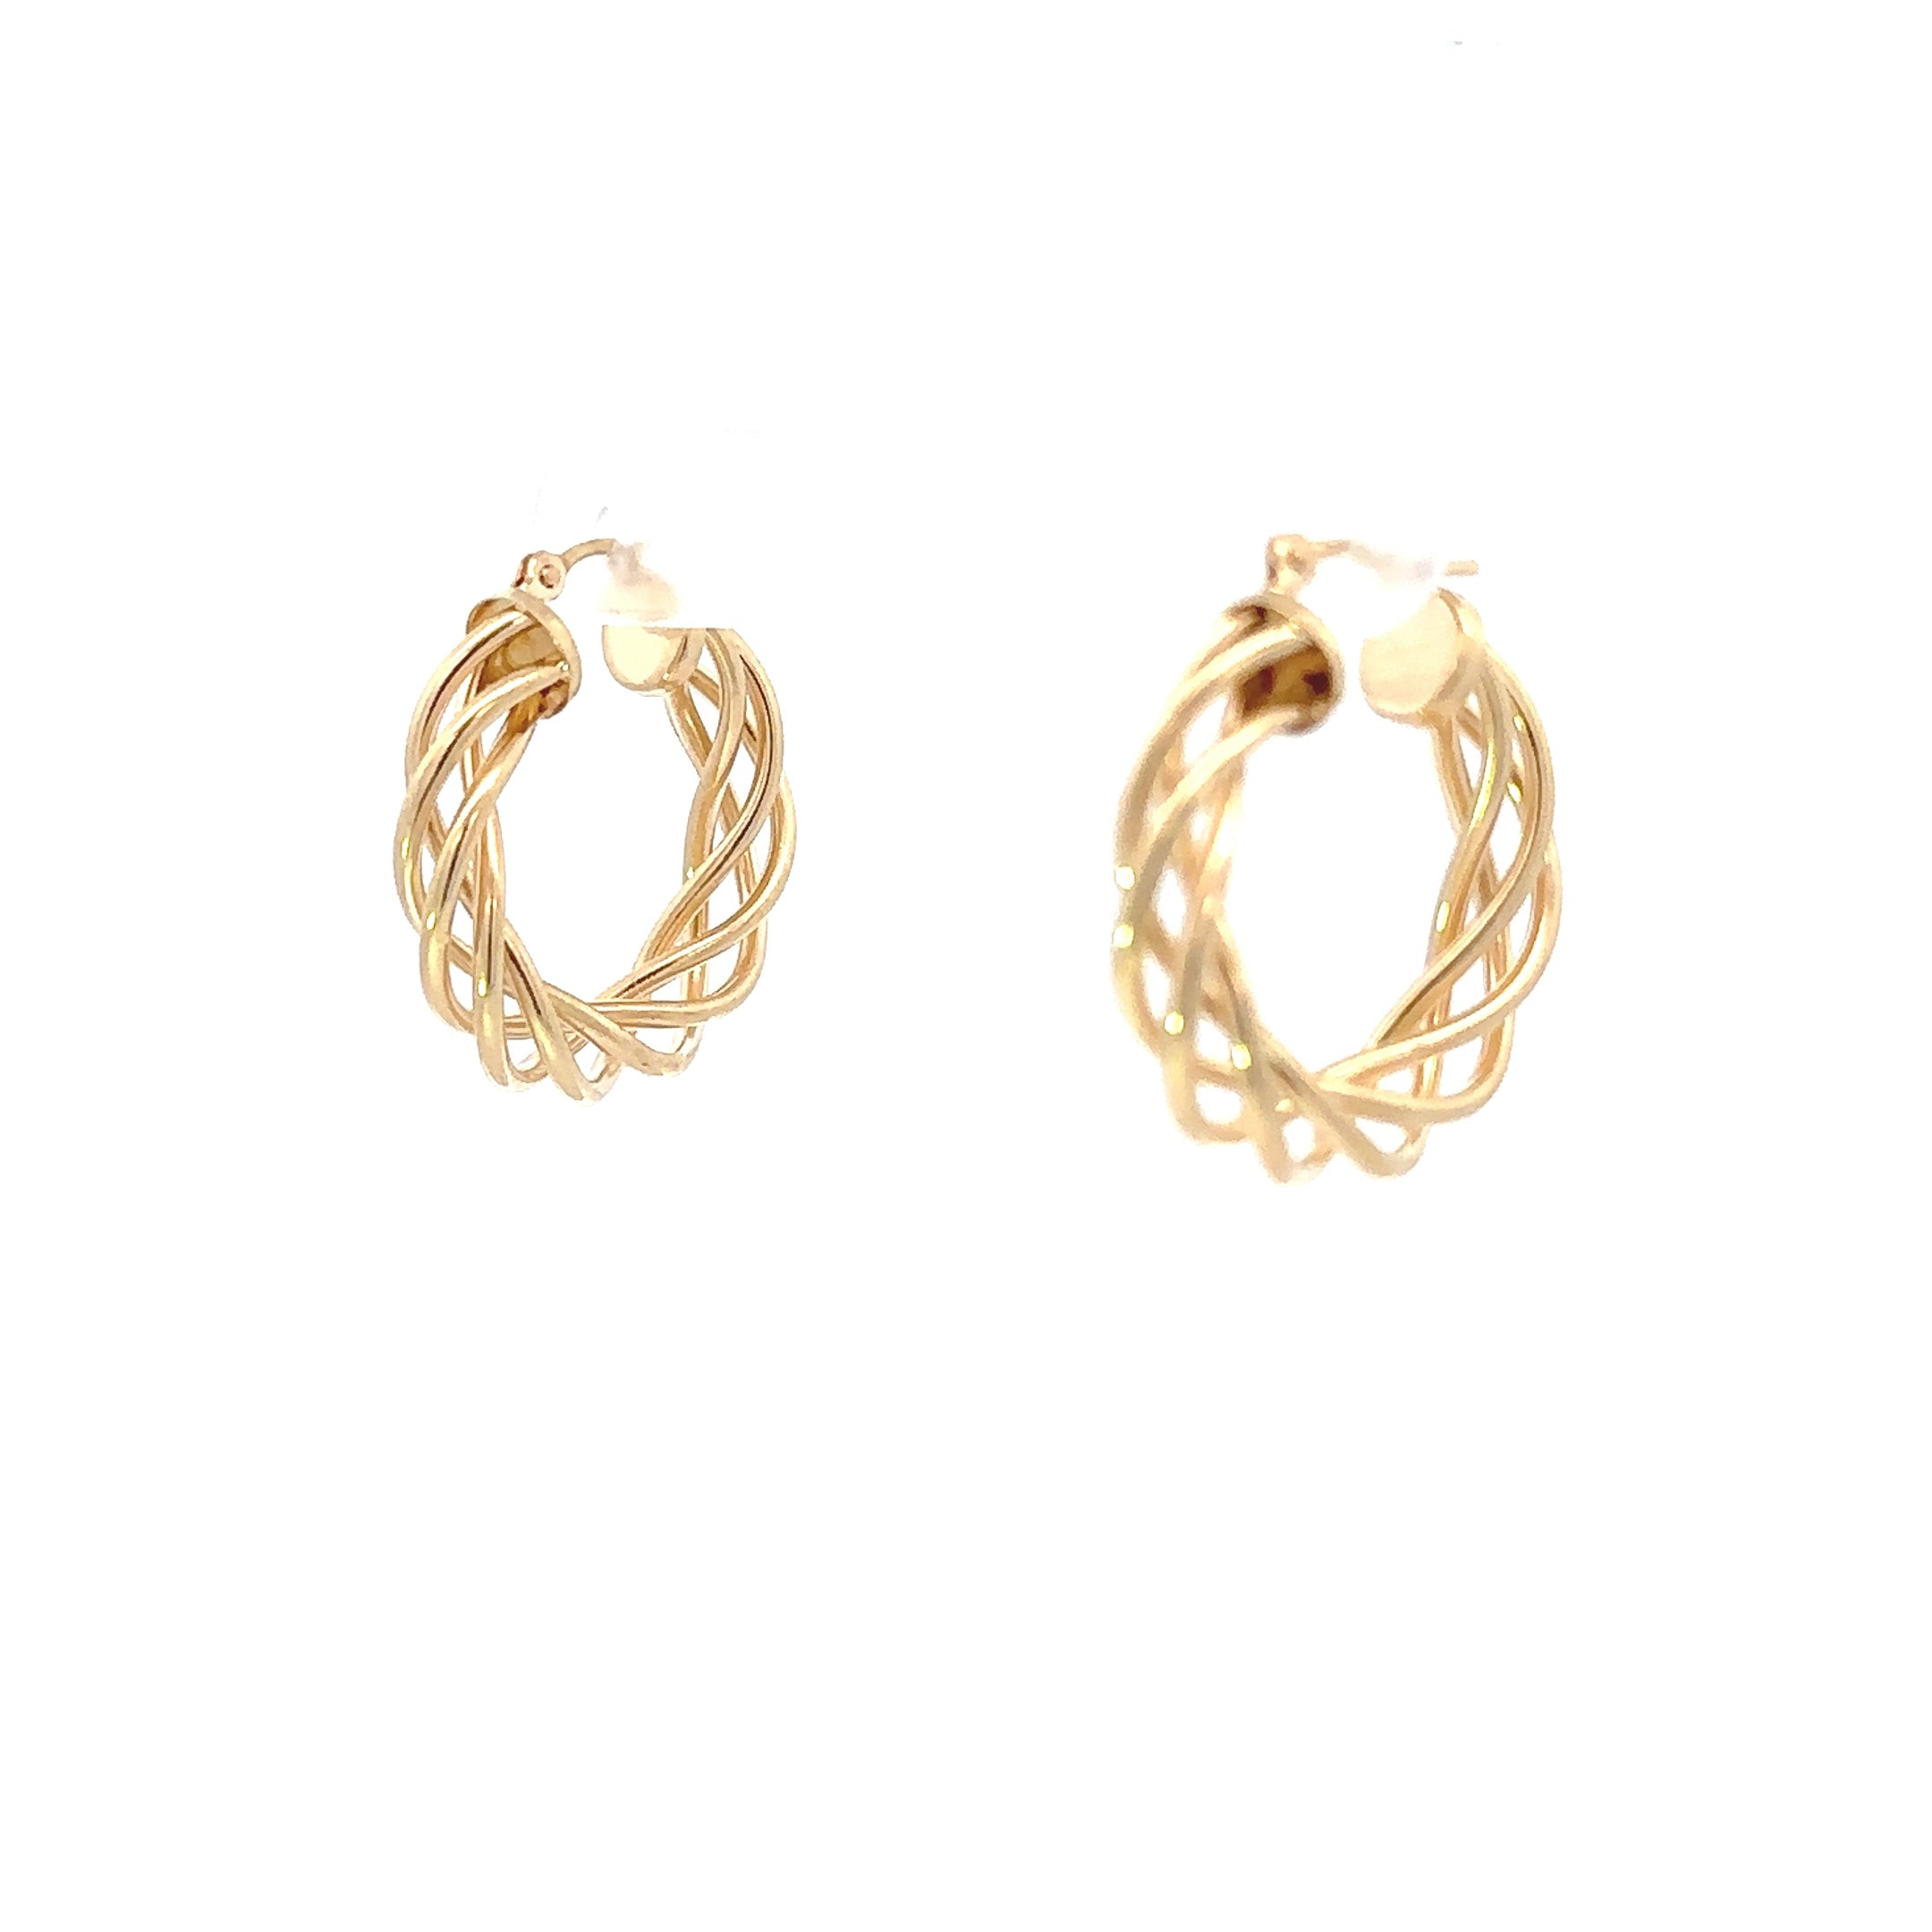 Estate Collection: 14K Yellow Gold 4-Strand Twisting Hoop Earrings